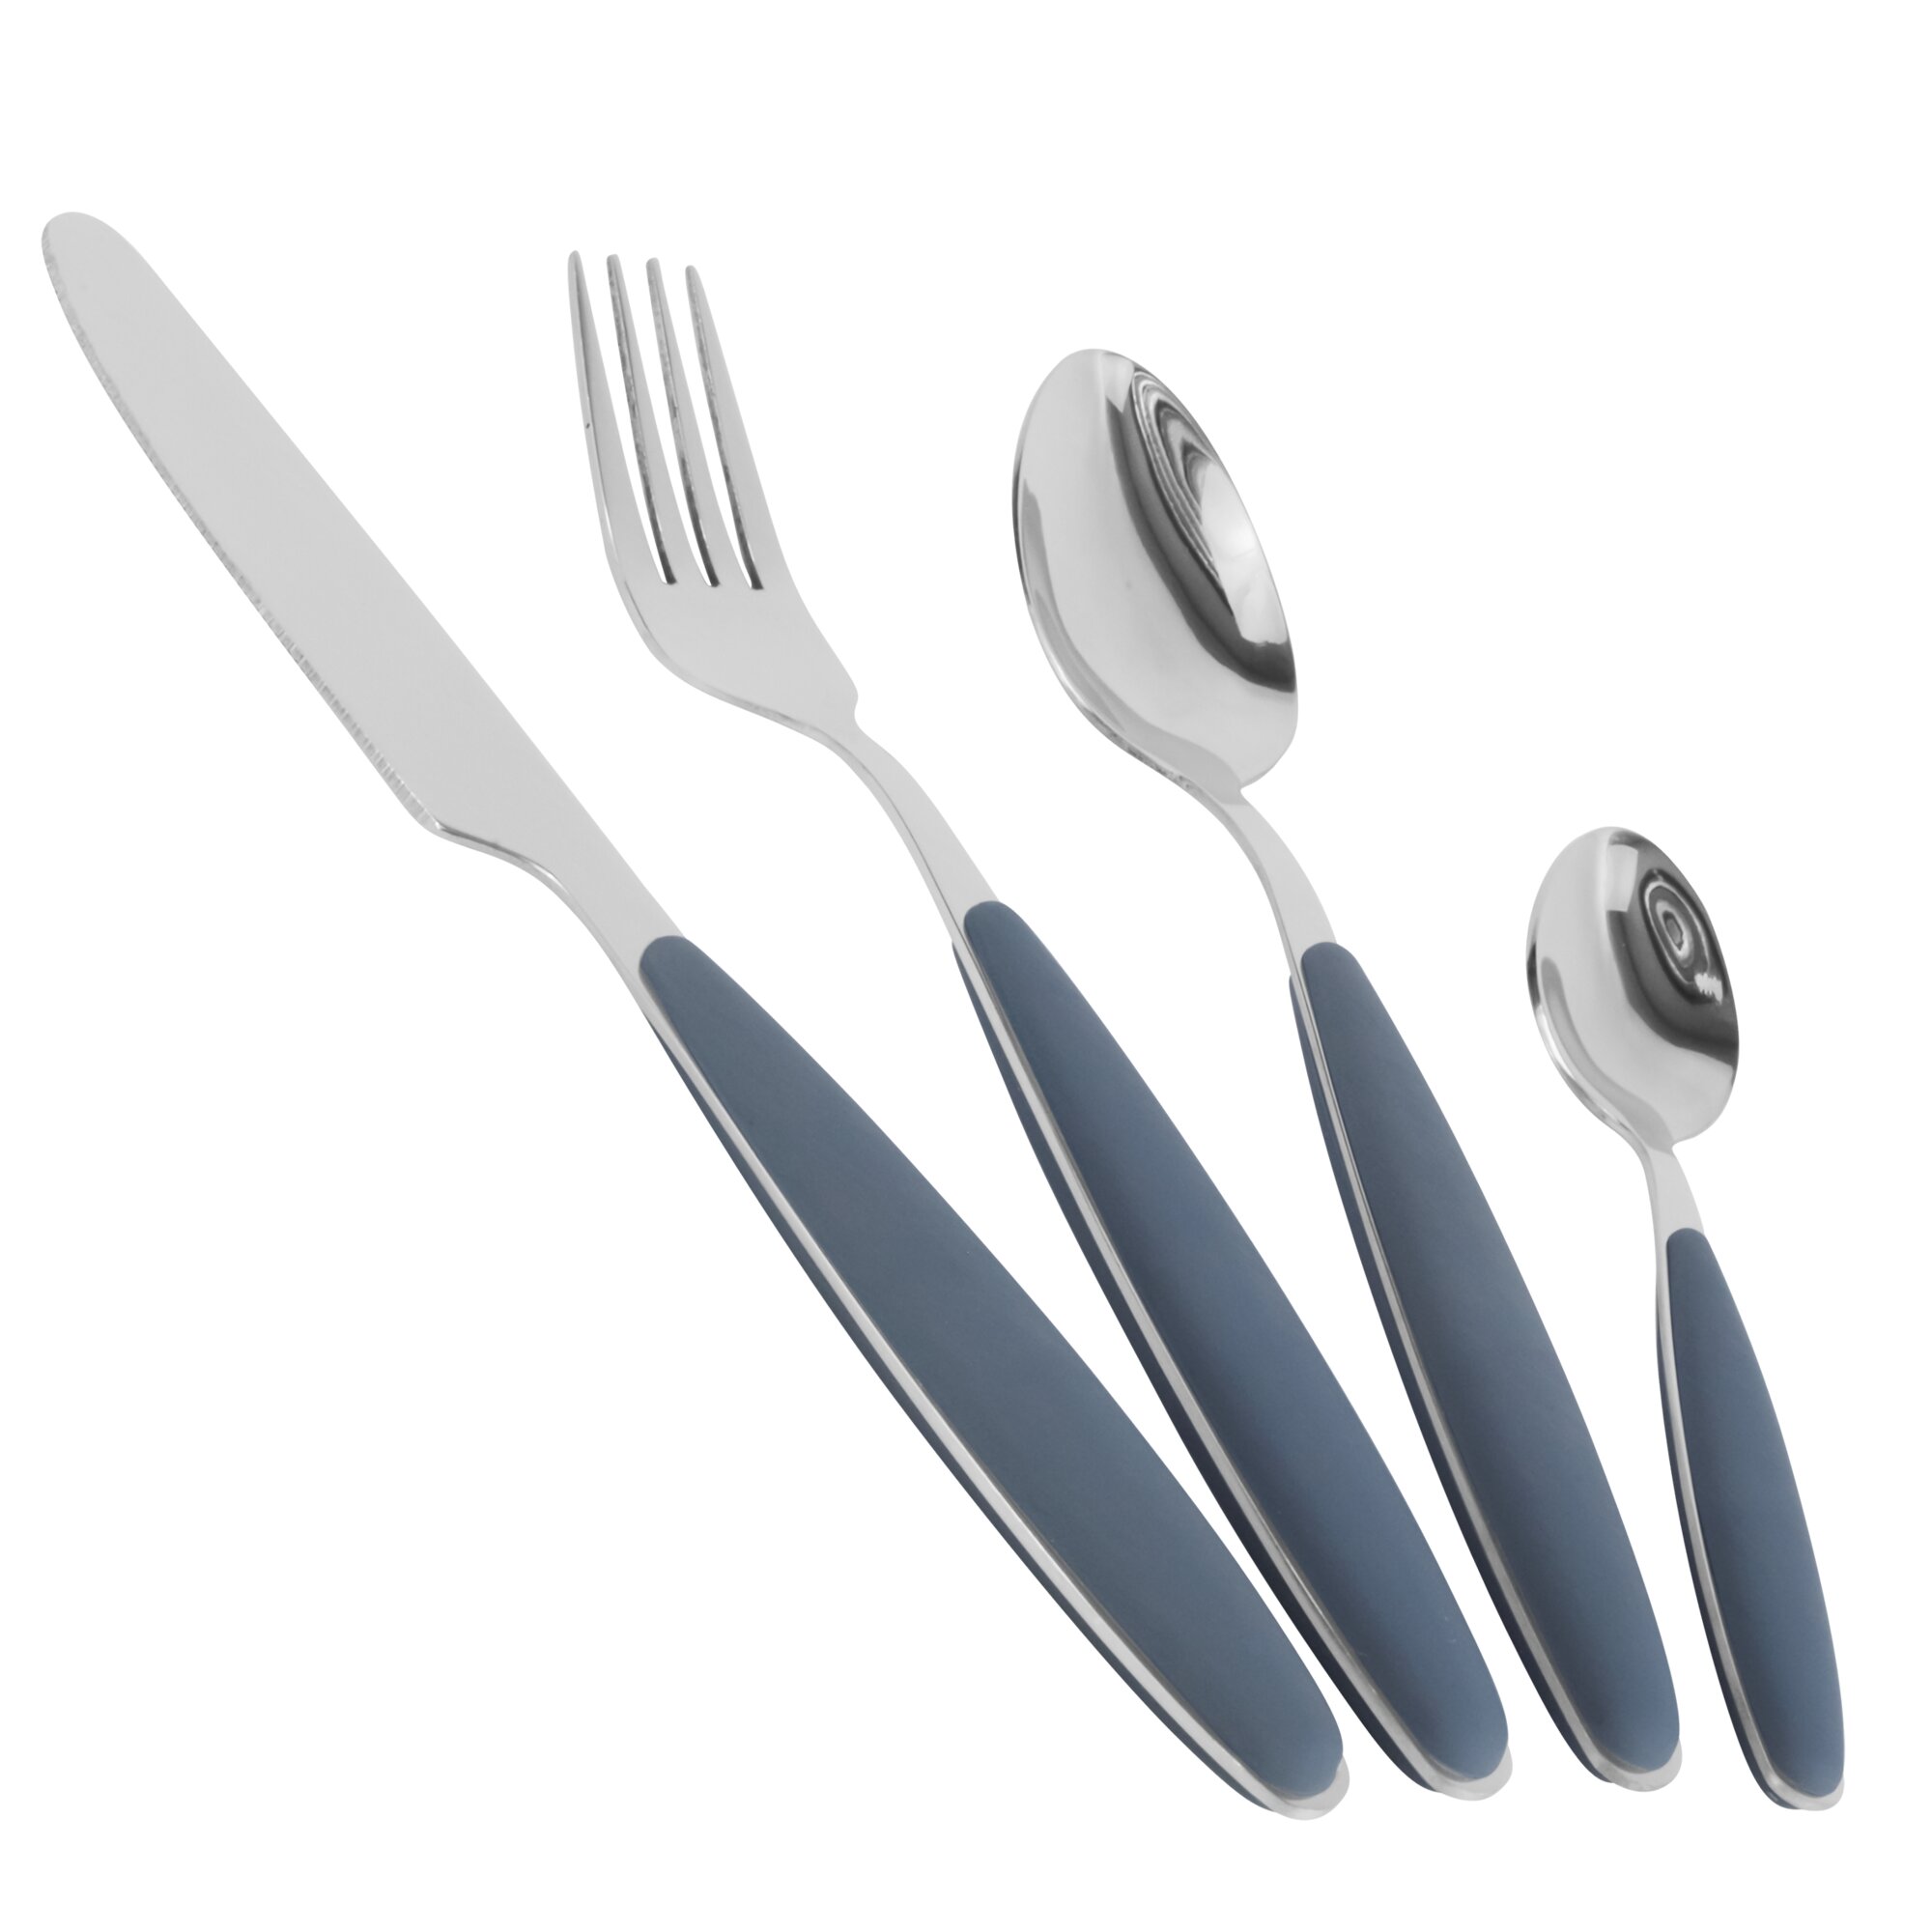 Blue stainless steel cutlery brand GIMEX